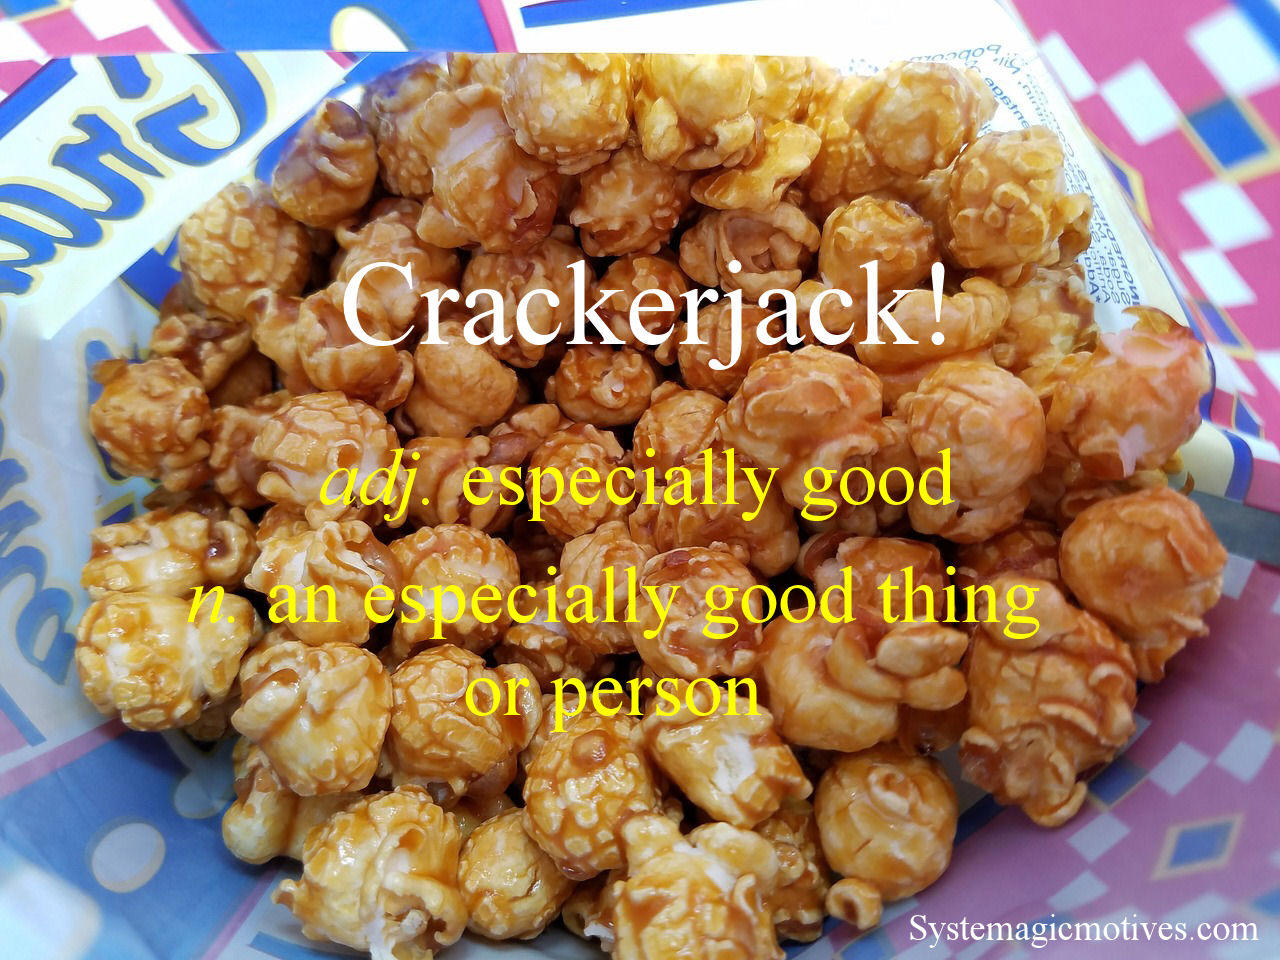 Graphic Definition of Crackerjack